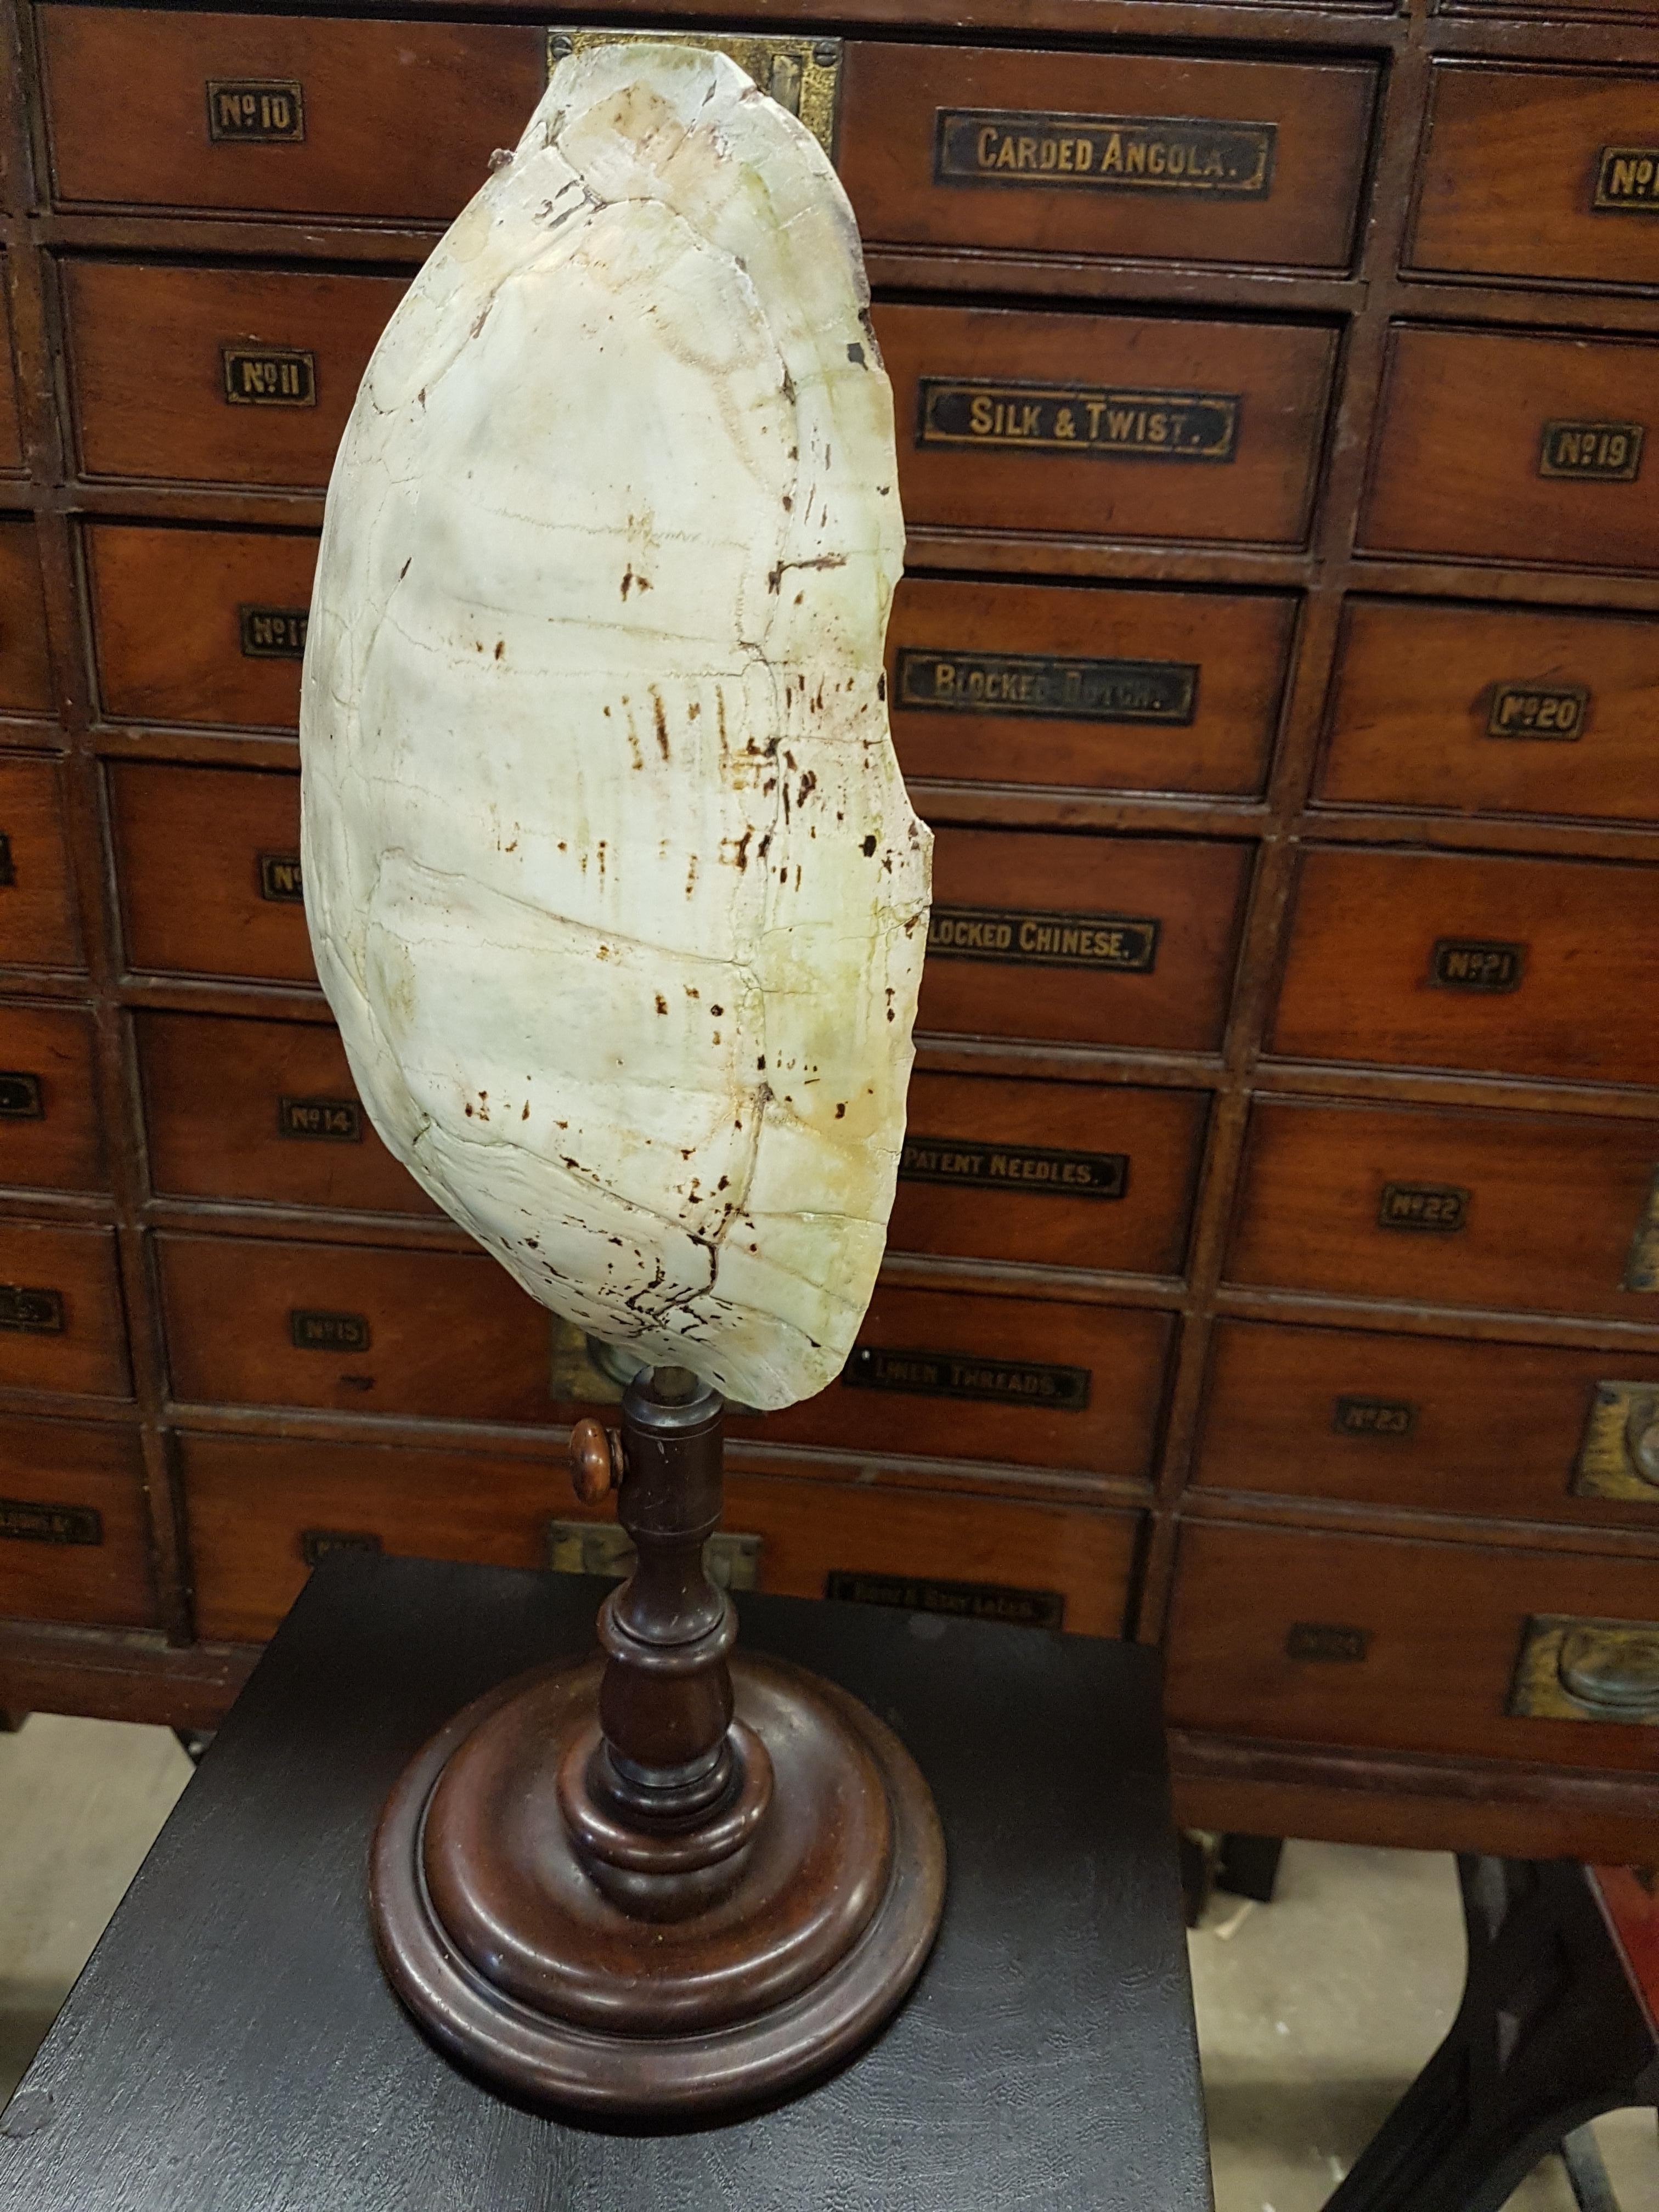 A very appealing pale 19th century tortoise carapace that is on a turned mahogany stand of the same period. The carapace does have old marks and knocks but is solid. it hangs on the stand by an old hook that is in the top of the shell.

The turned